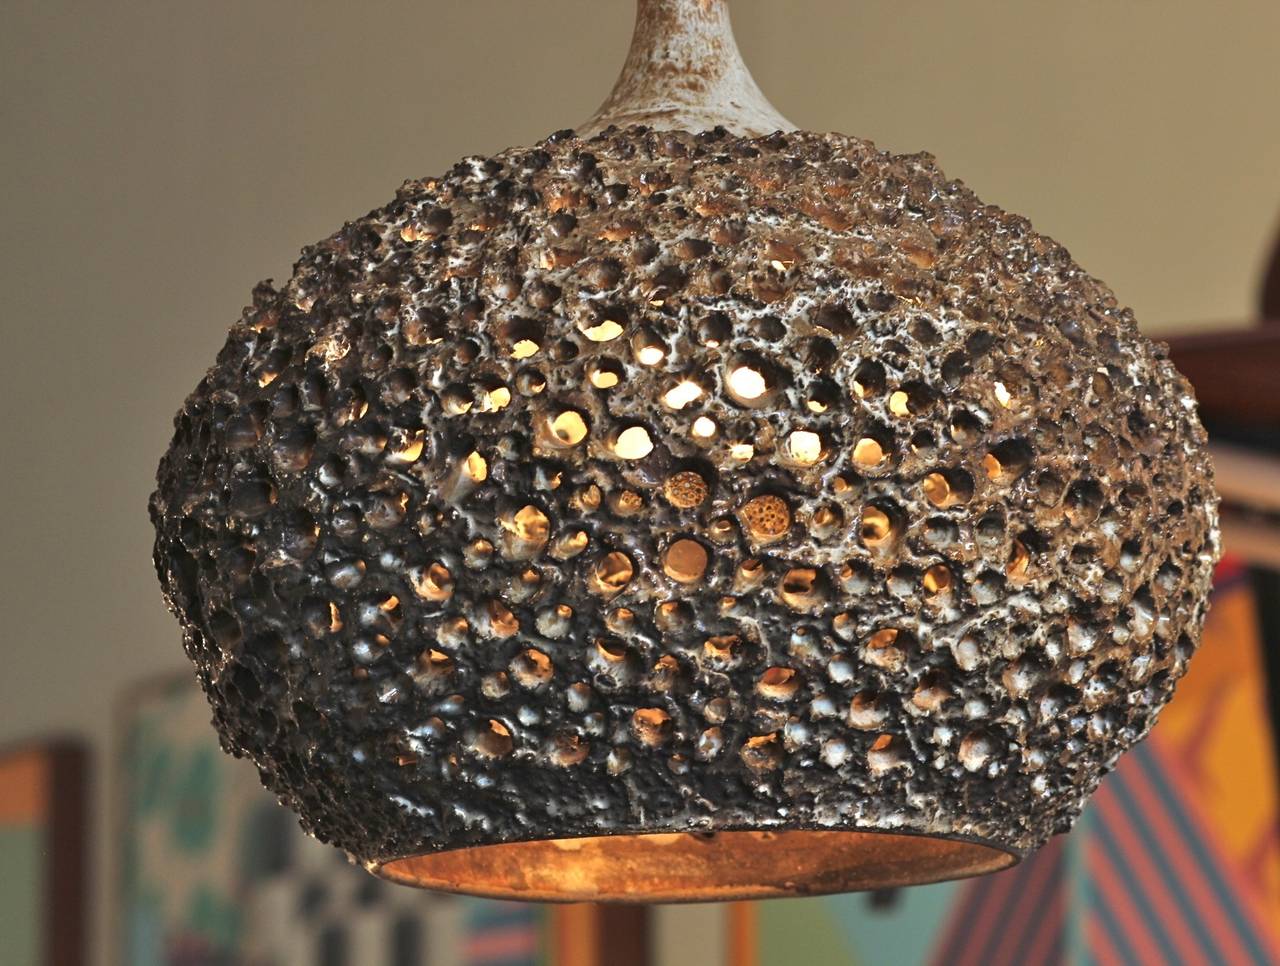 Pierced ceramic ceiling light by Mid-Century Danish modern pottery studio Sejer. This phenomenal lamp emits a dazzling chiaroscuro pattern from its pierced, crenellated surface (see photo 5). The lamp has a matching ceiling mount and about ten feet